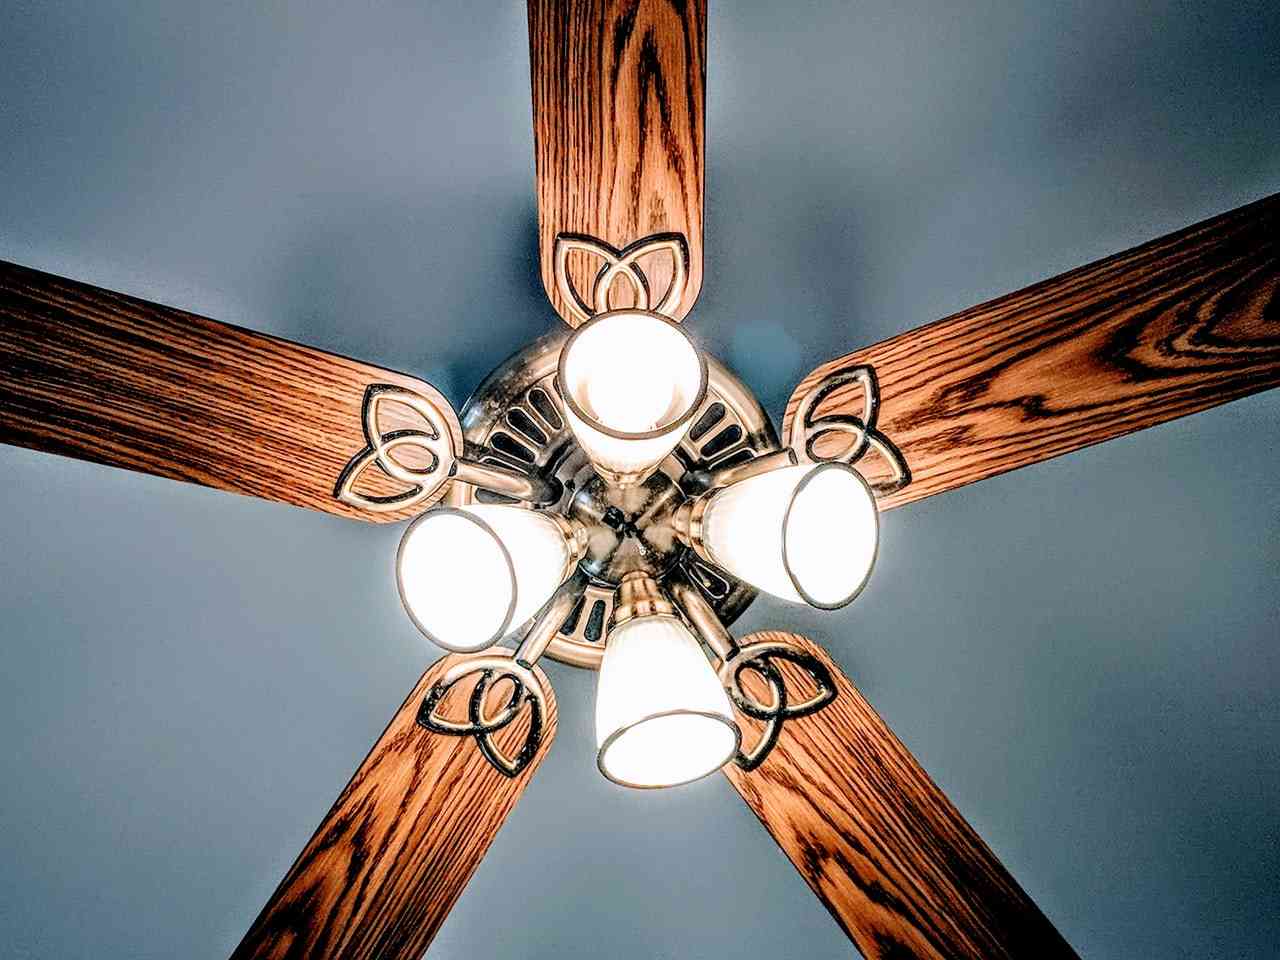 Identifying the common issues with ceiling fans